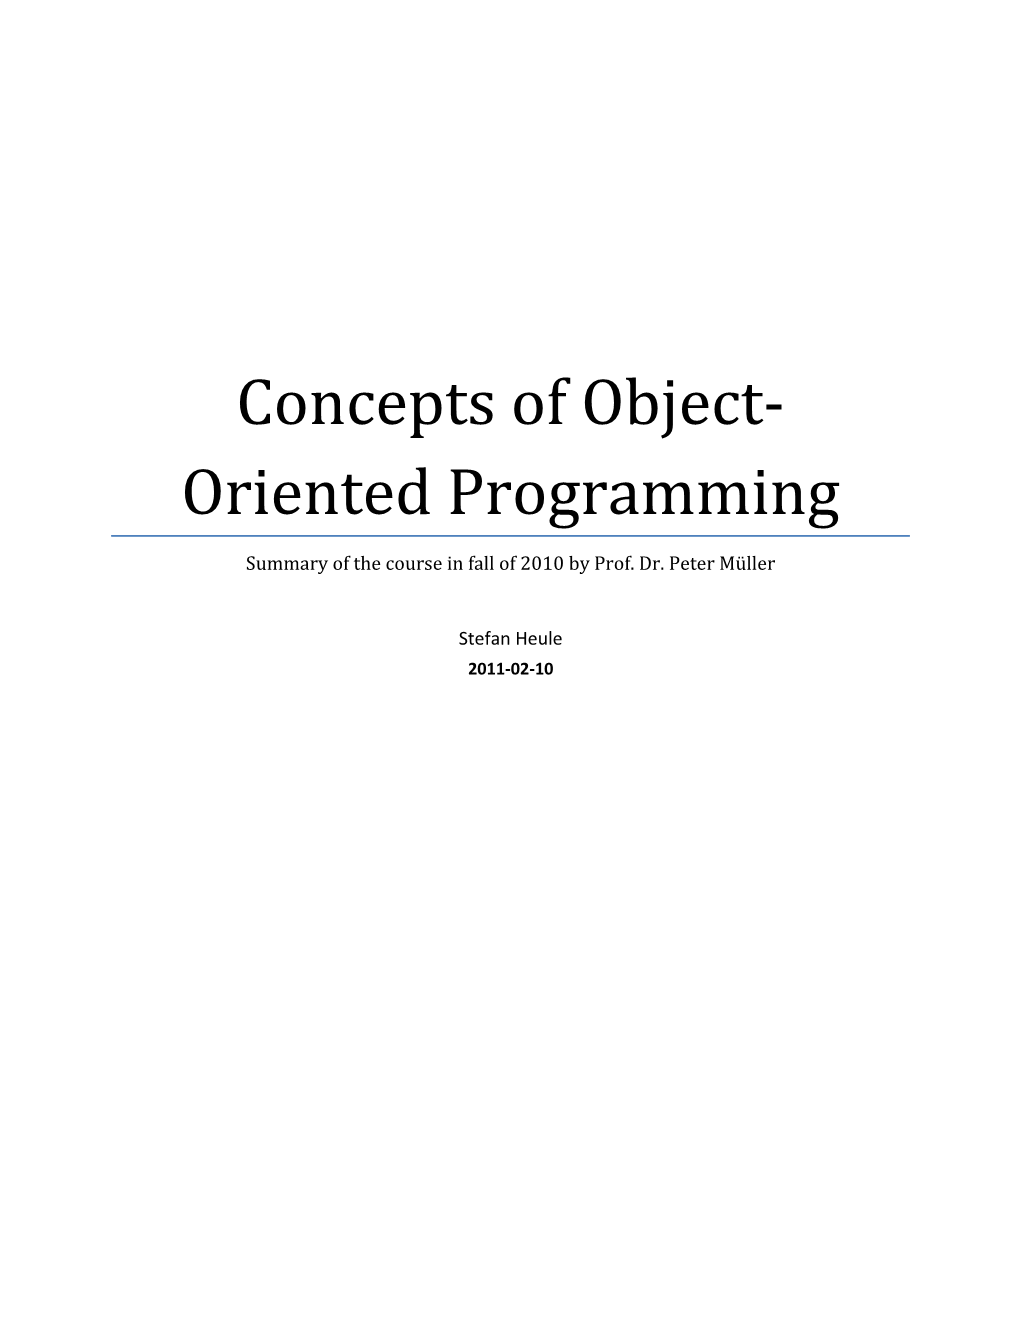 Concepts of Object-Oriented Programming